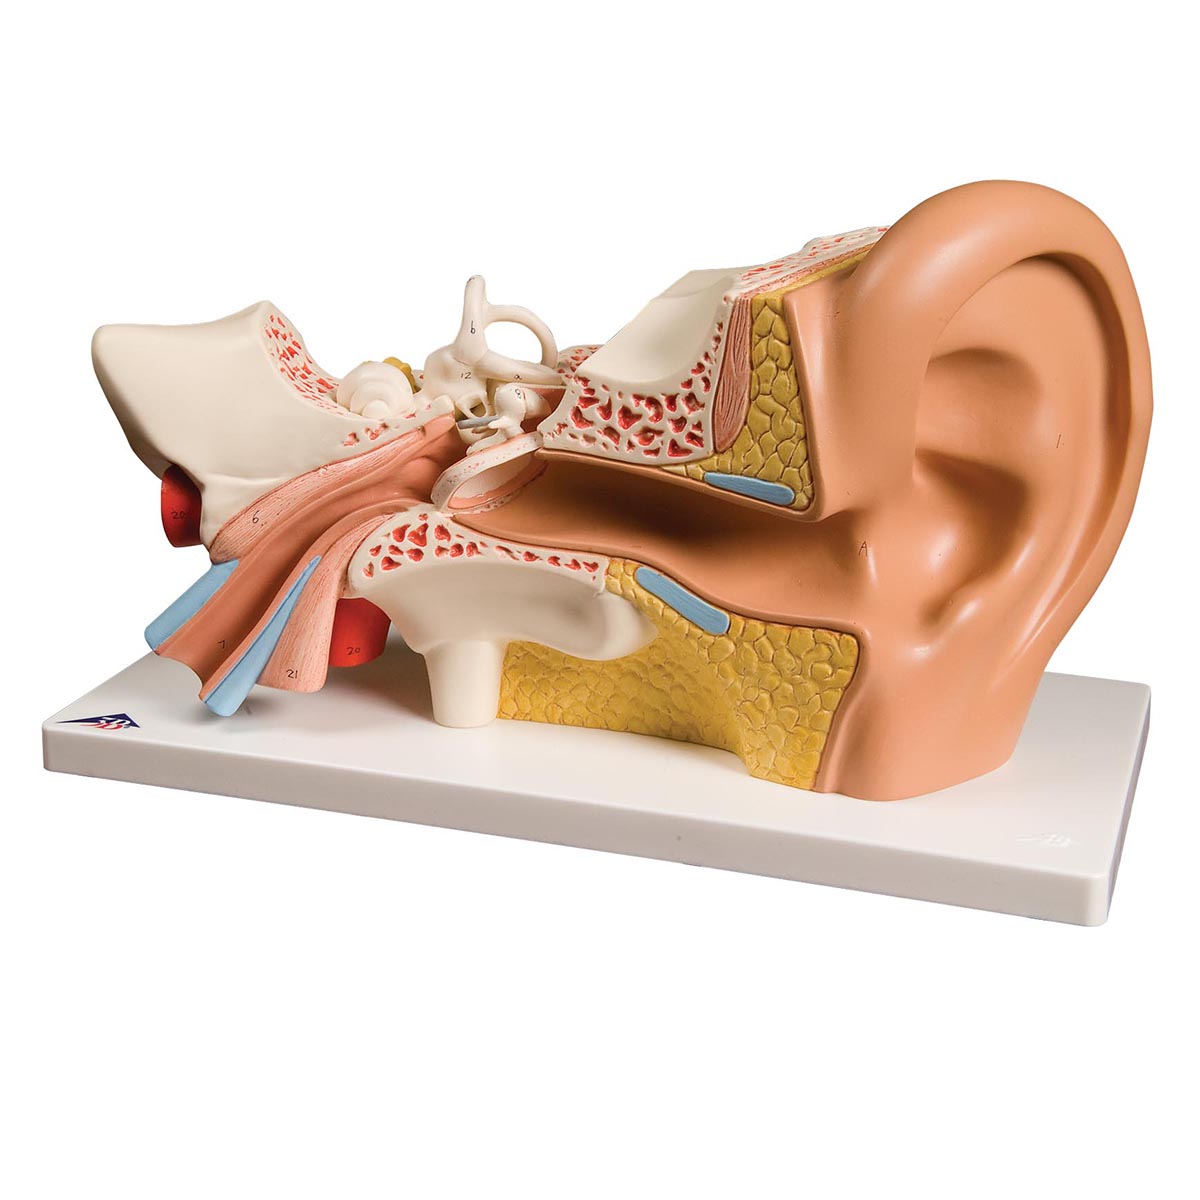 EAR 3 TIMES LIFE-SIZE, 6 PART (1000251)